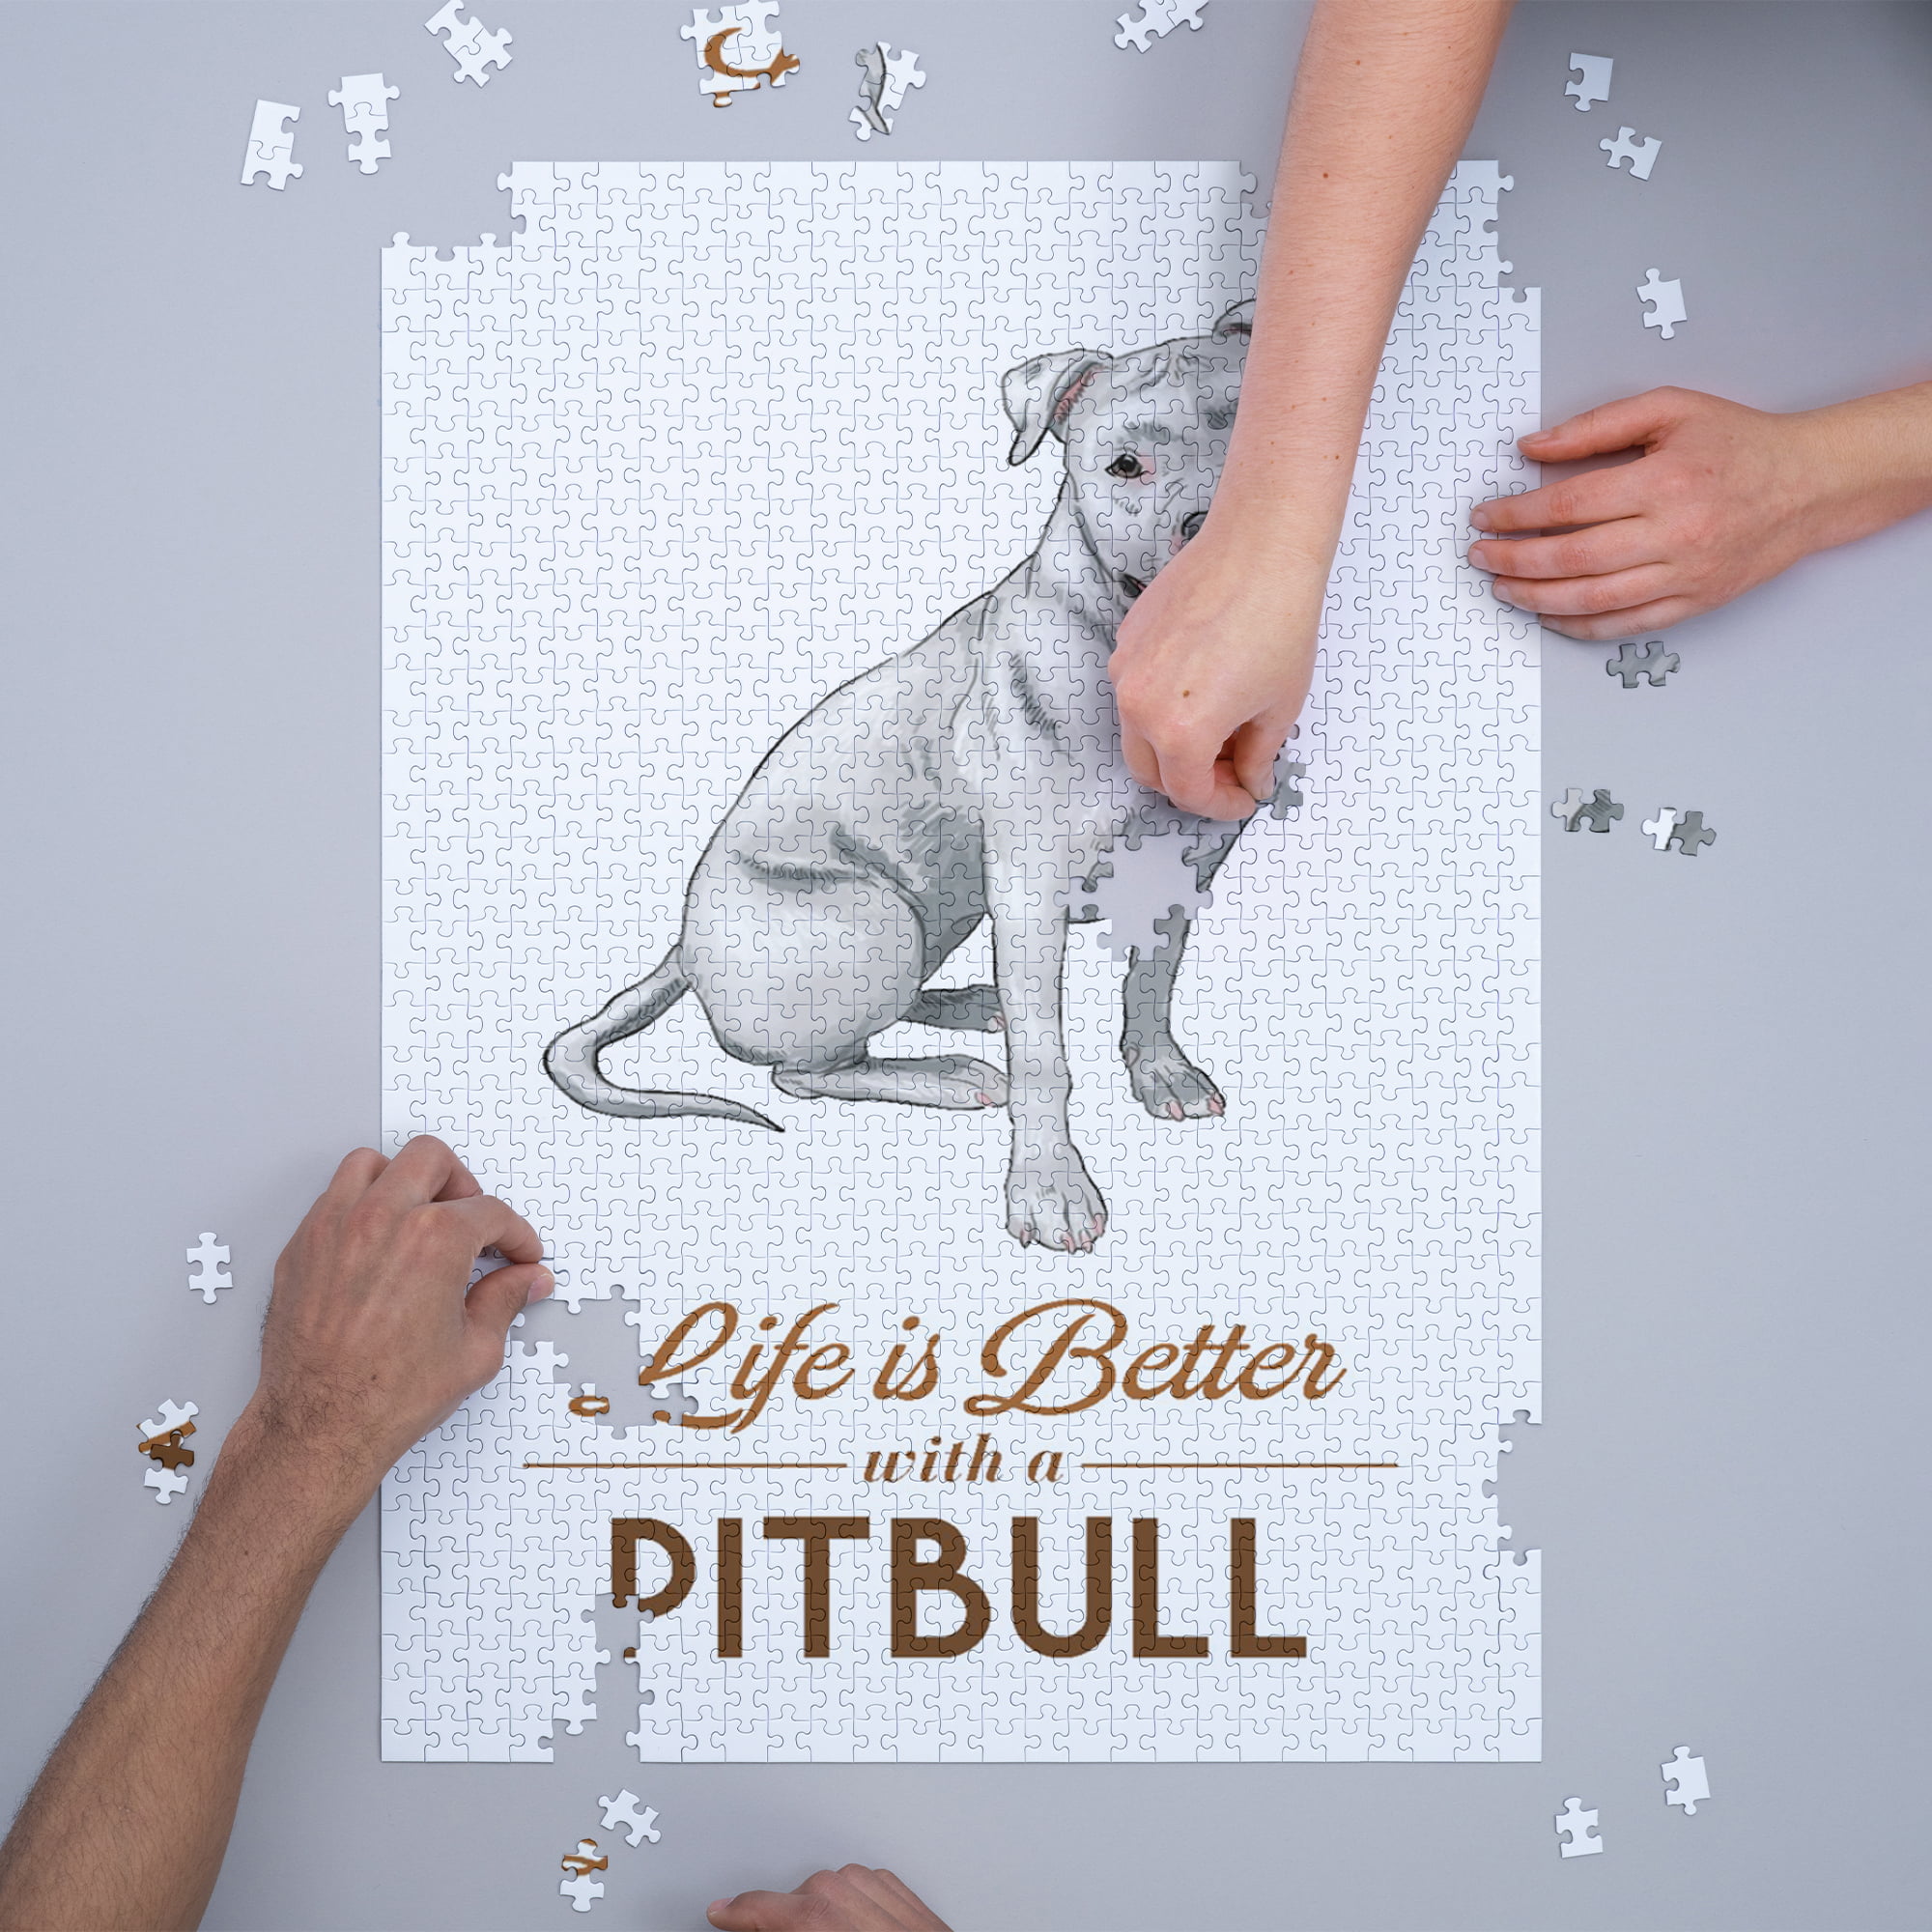 Pitbull, Black and White, Life is Better (19x27 inches, Premium 500 Piece Jigsaw  Puzzle for Adults and Family, Made in USA) 